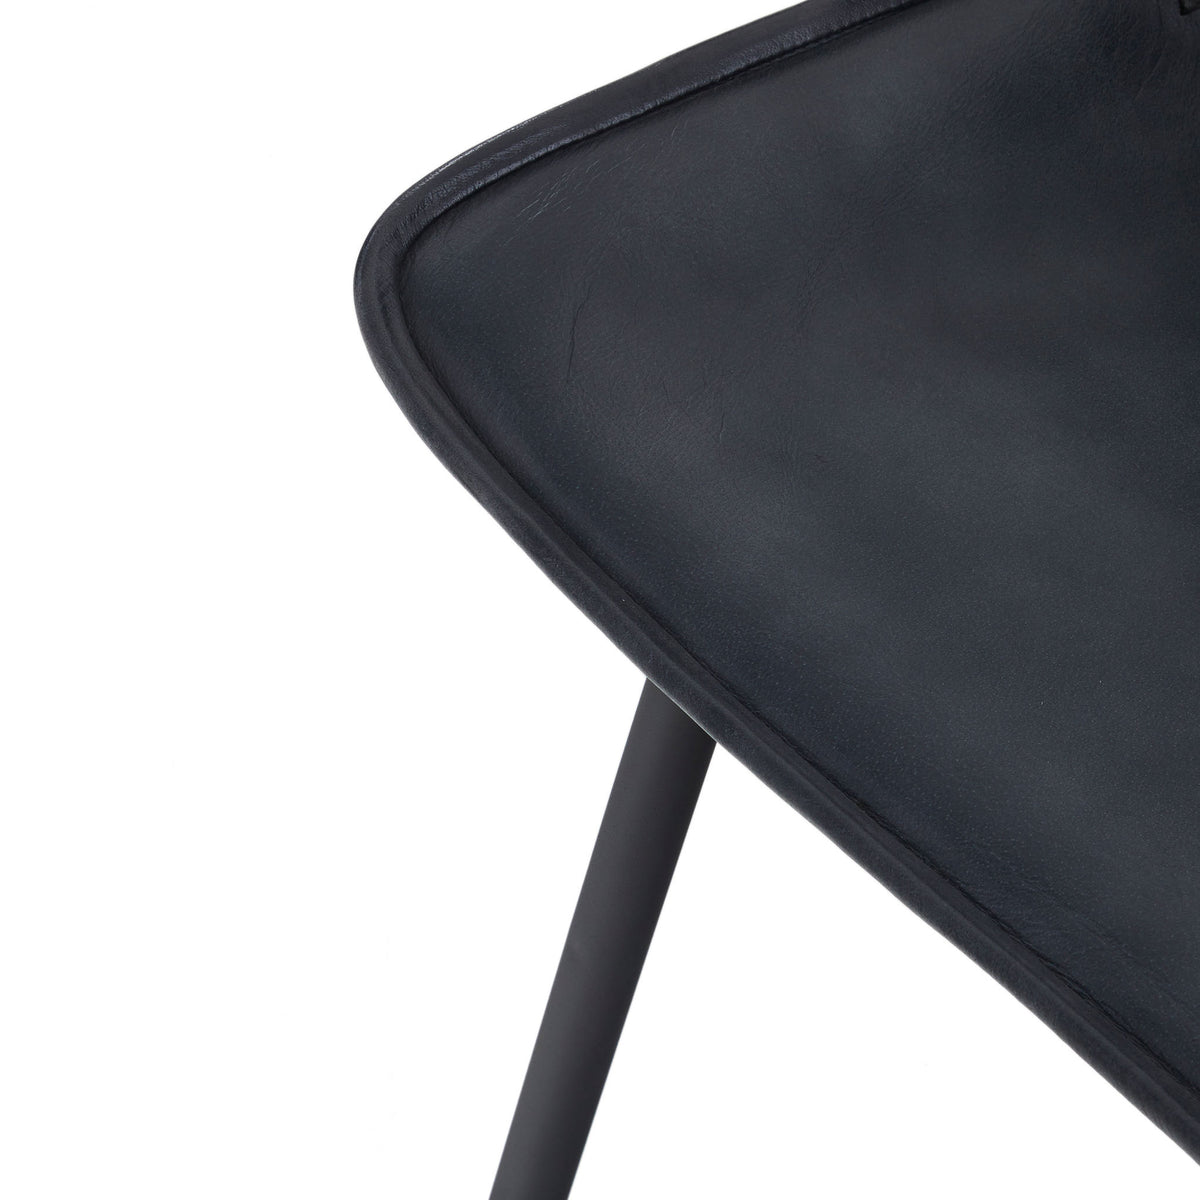 Elgin Brown Leather Breakfast Bar Stool close up of seat edge